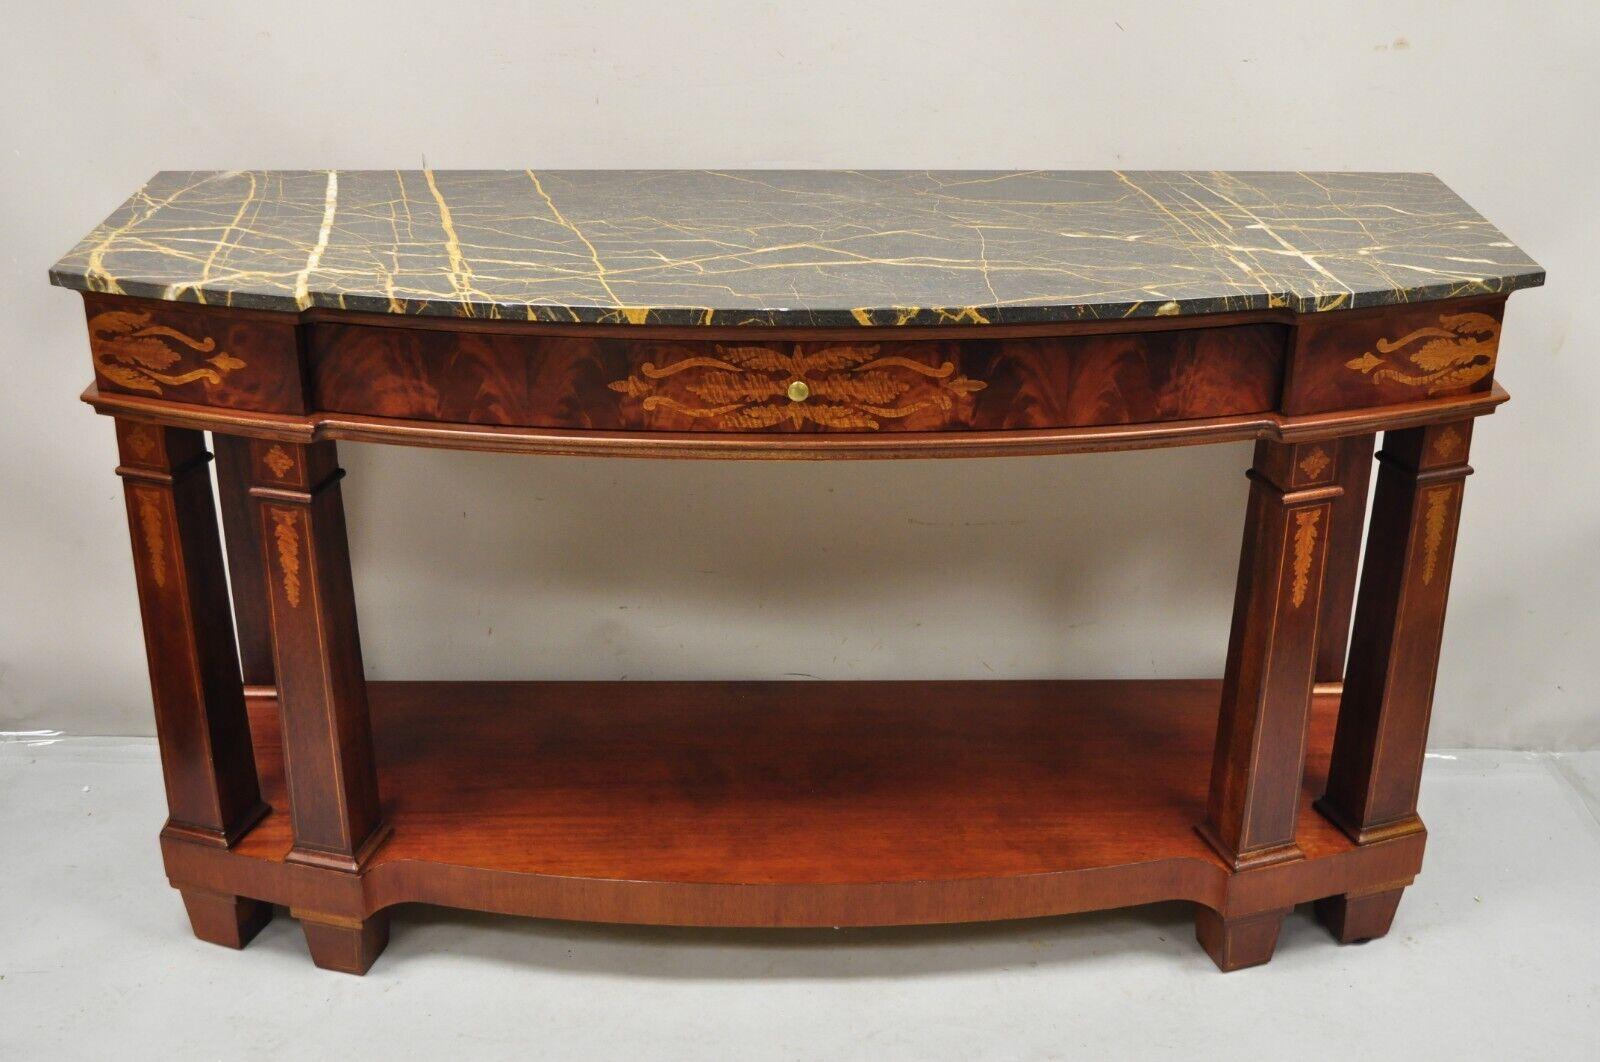 Henredon Marble Top One Drawer Inlaid Mahogany Empire Sideboard Buffet Server. Item features a stunning marble top, one dovetailed drawer, very nice inlay, heavy solid construction, original stamp, quality craftsmanship, great style and form. Circa